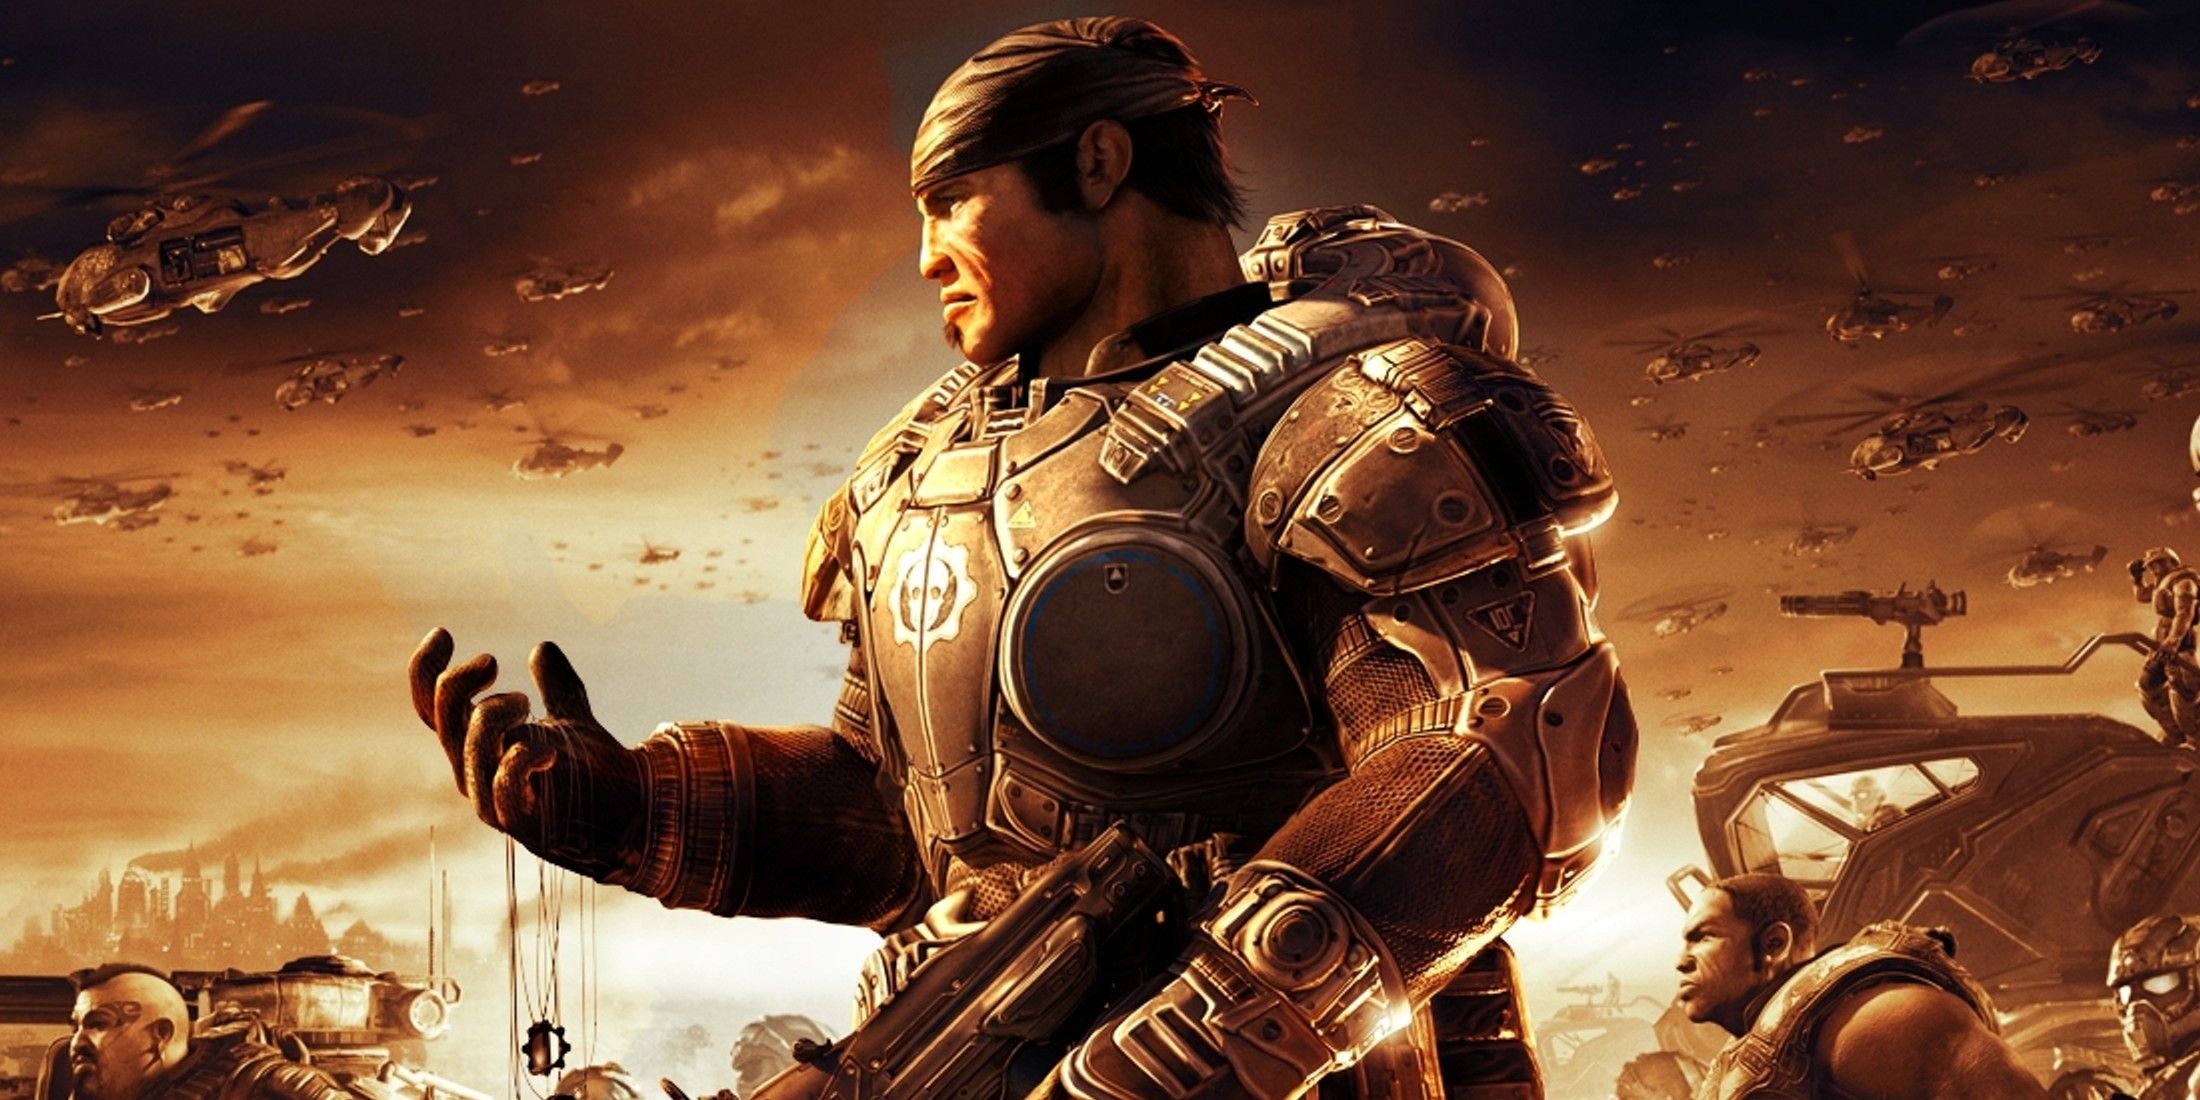 gears of war YouTube channel has been purged